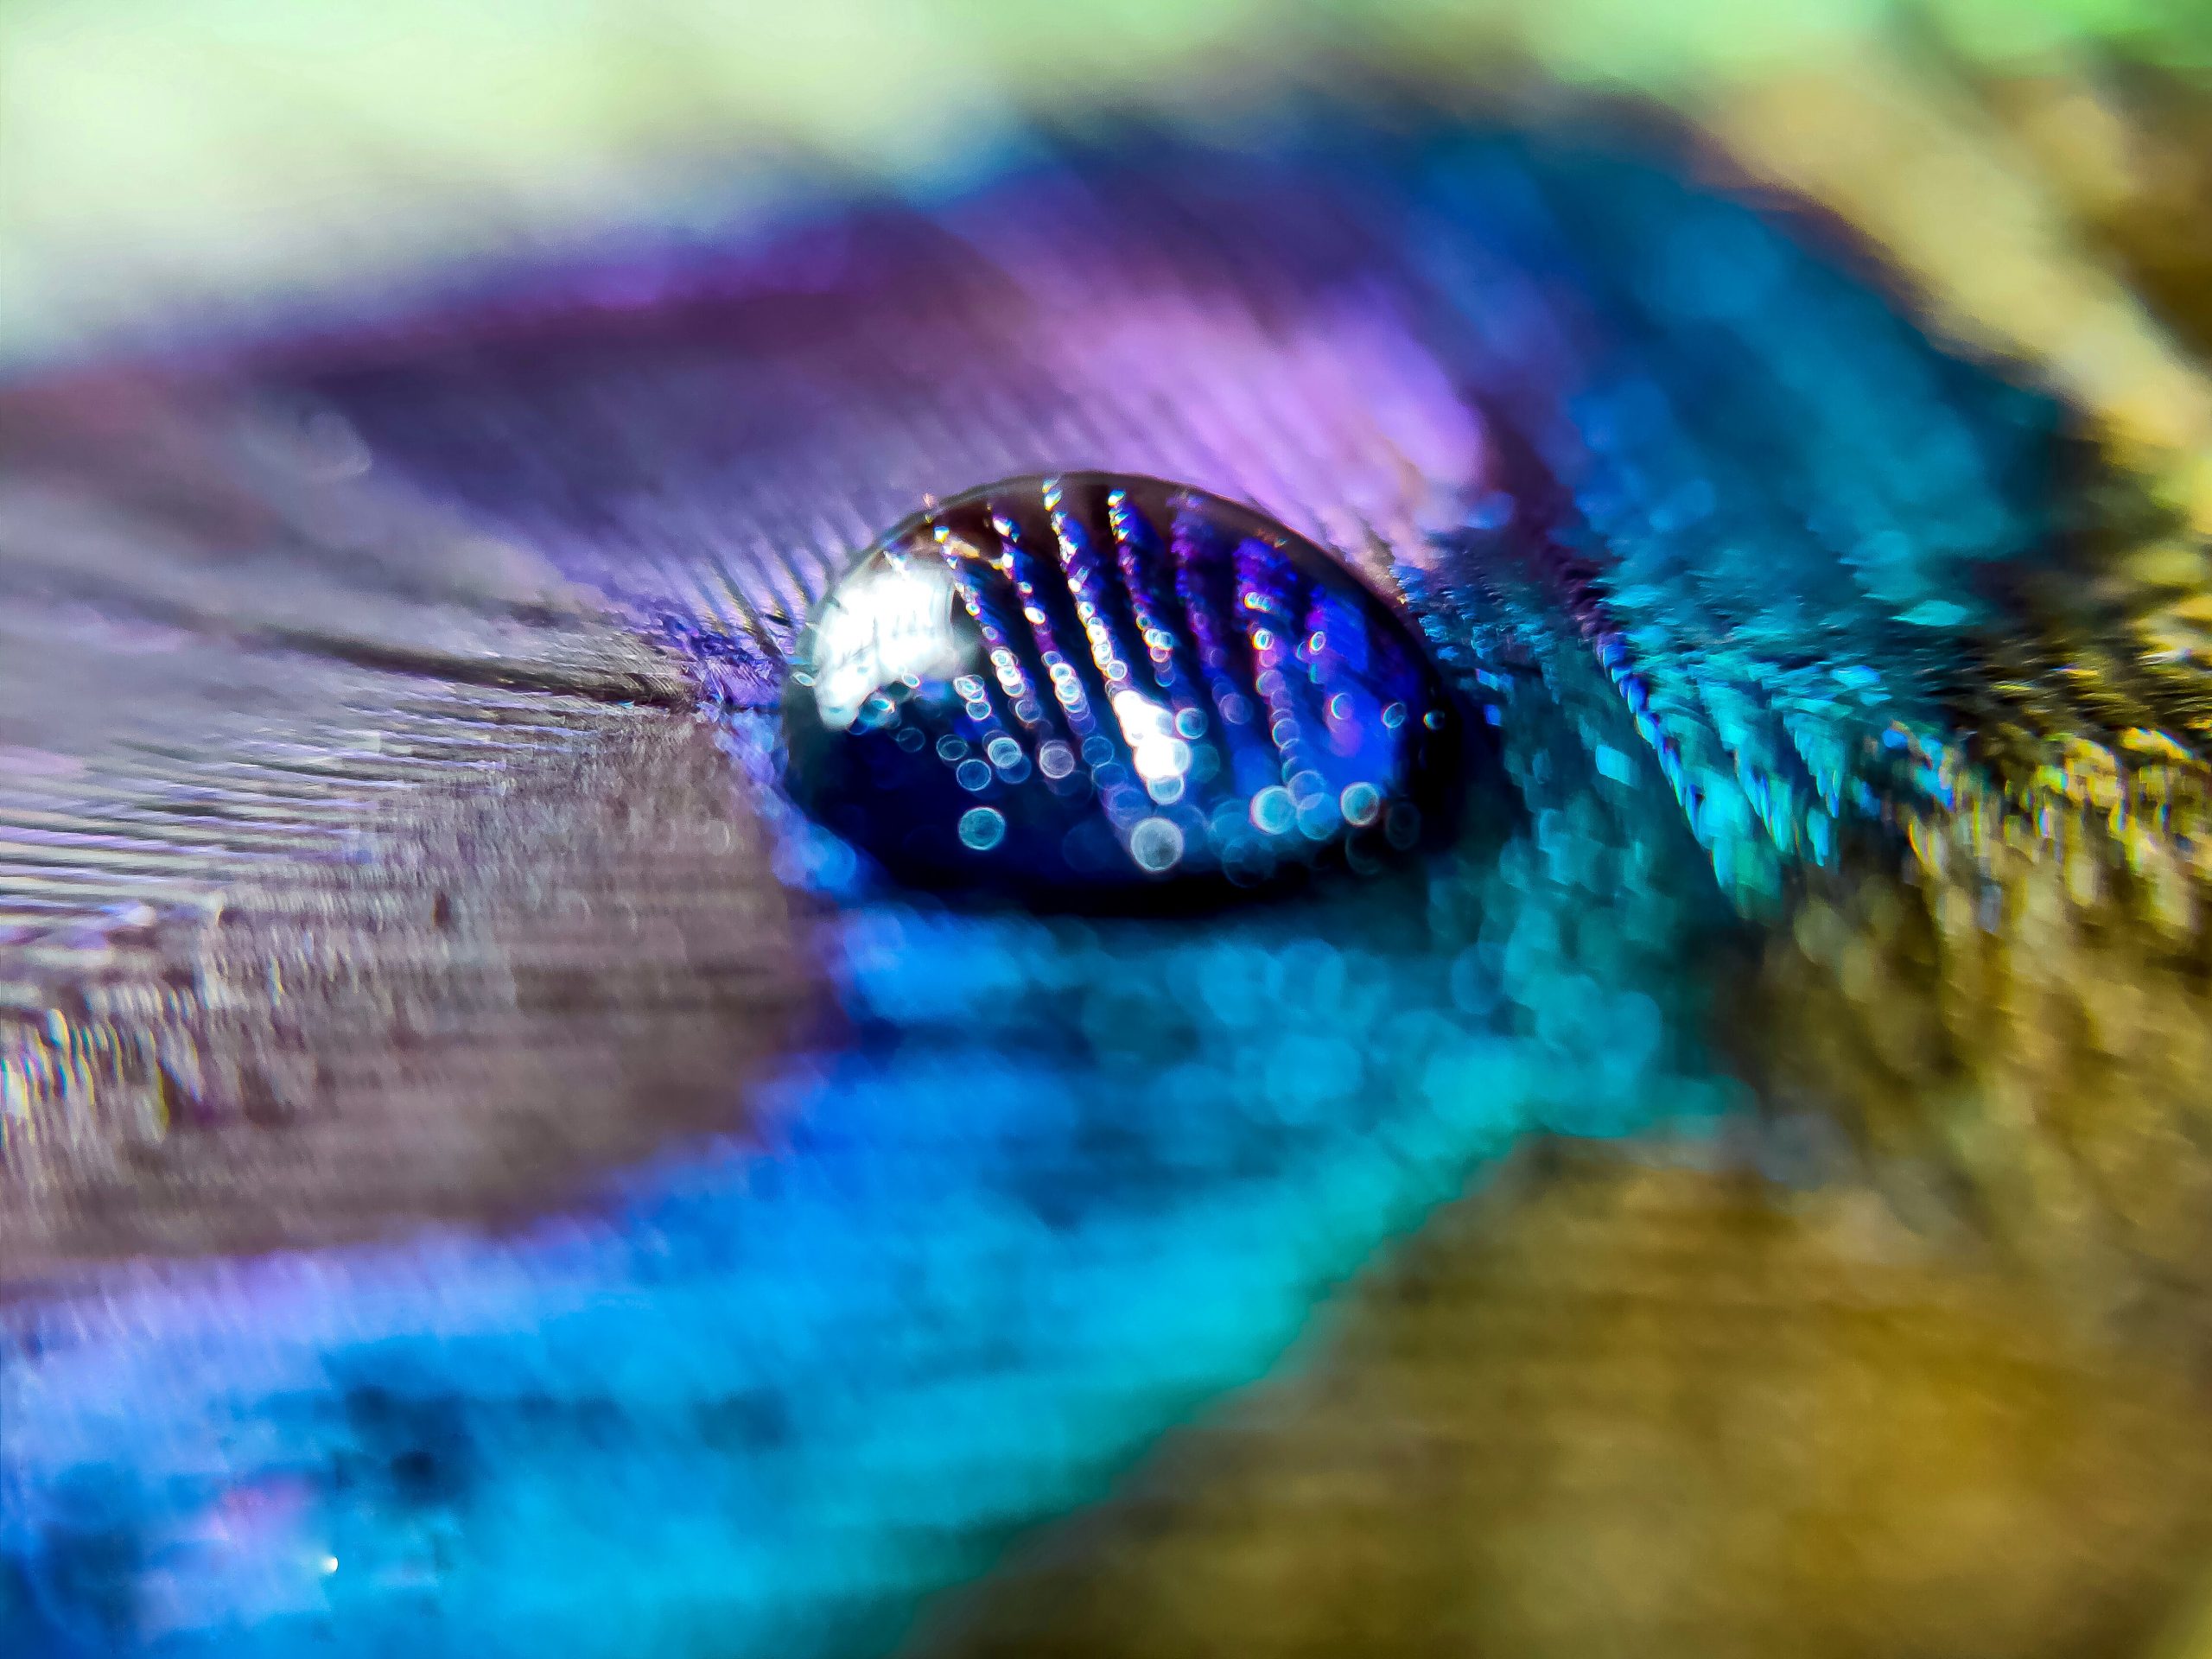 Drop on peacock feather